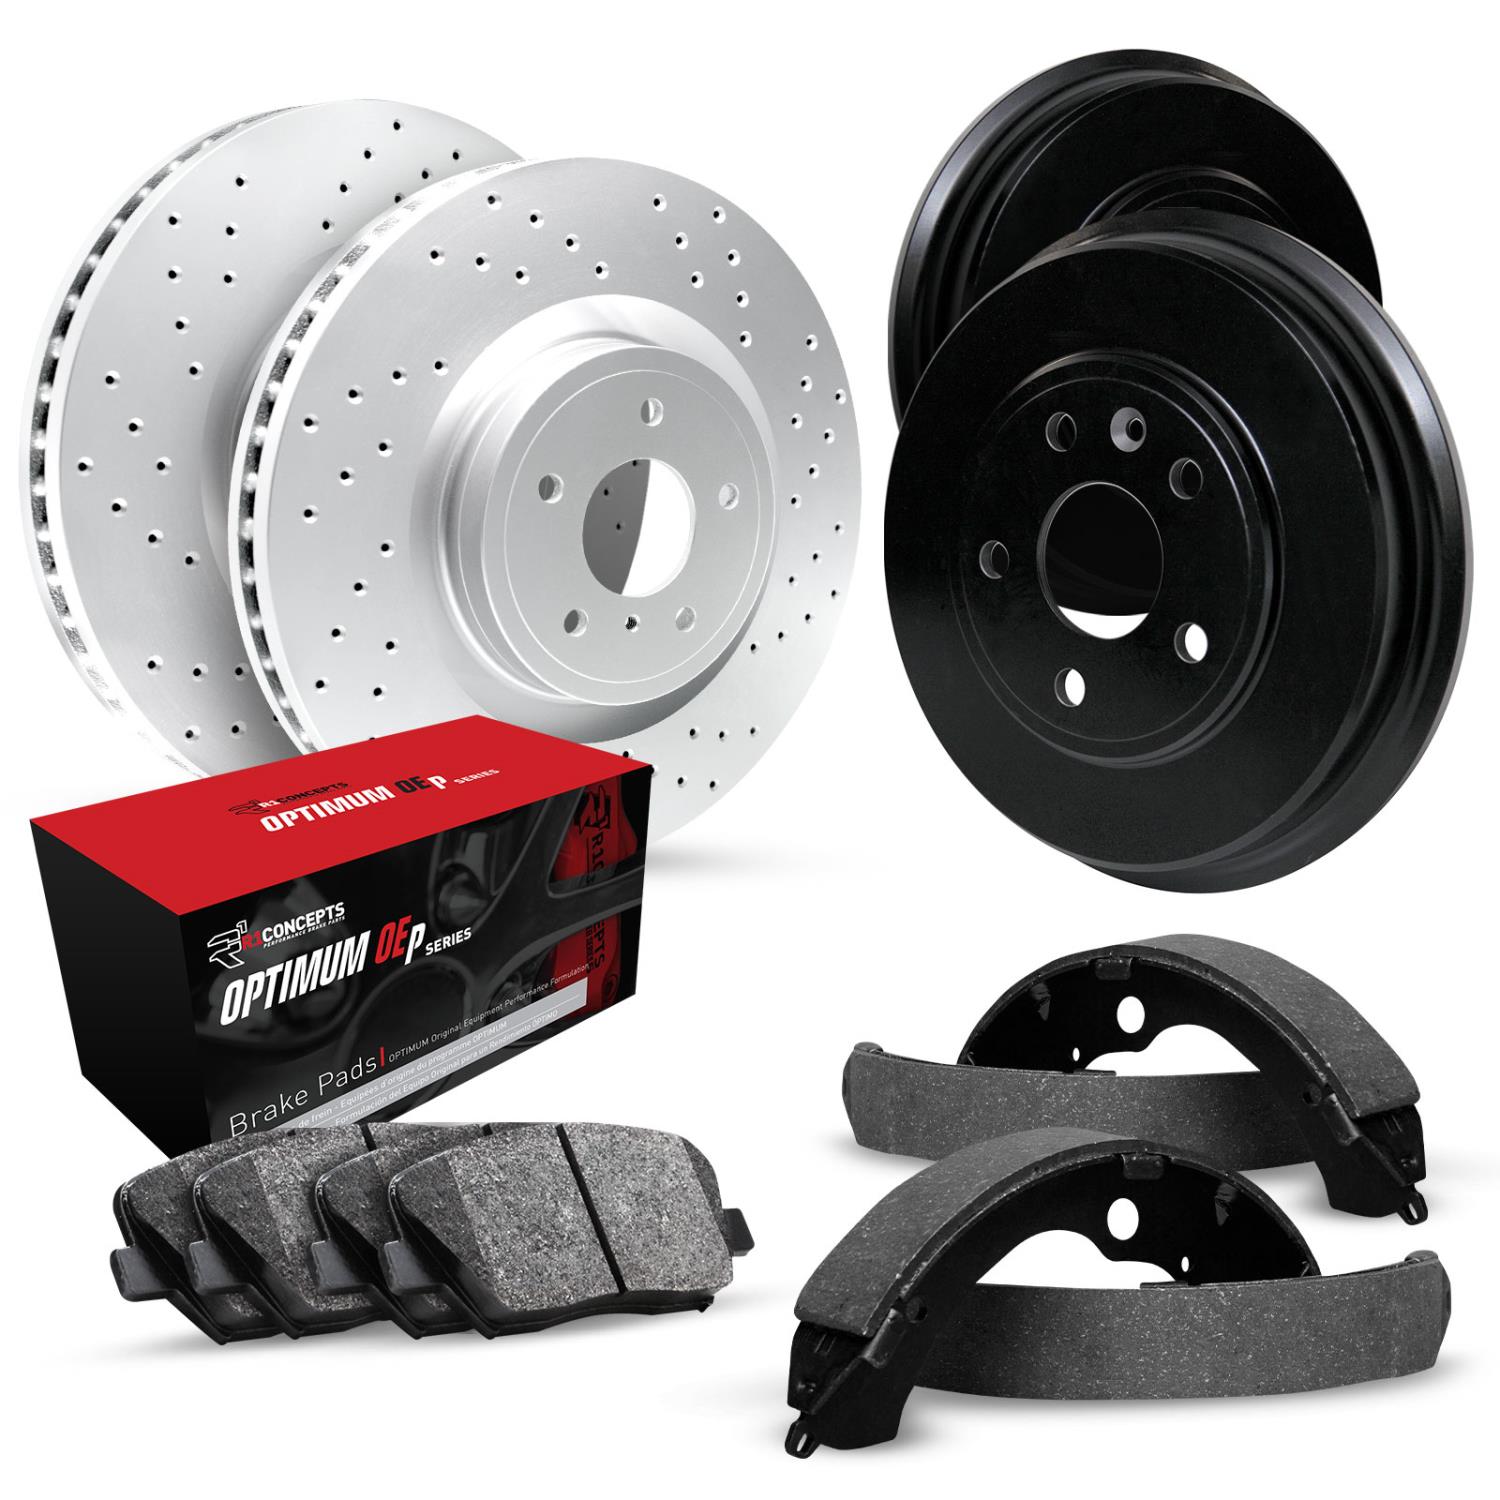 GEO-Carbon Drilled Brake Rotor & Drum Set w/Optimum OE Pads & Shoes, 1981-1987 GM, Position: Front & Rear